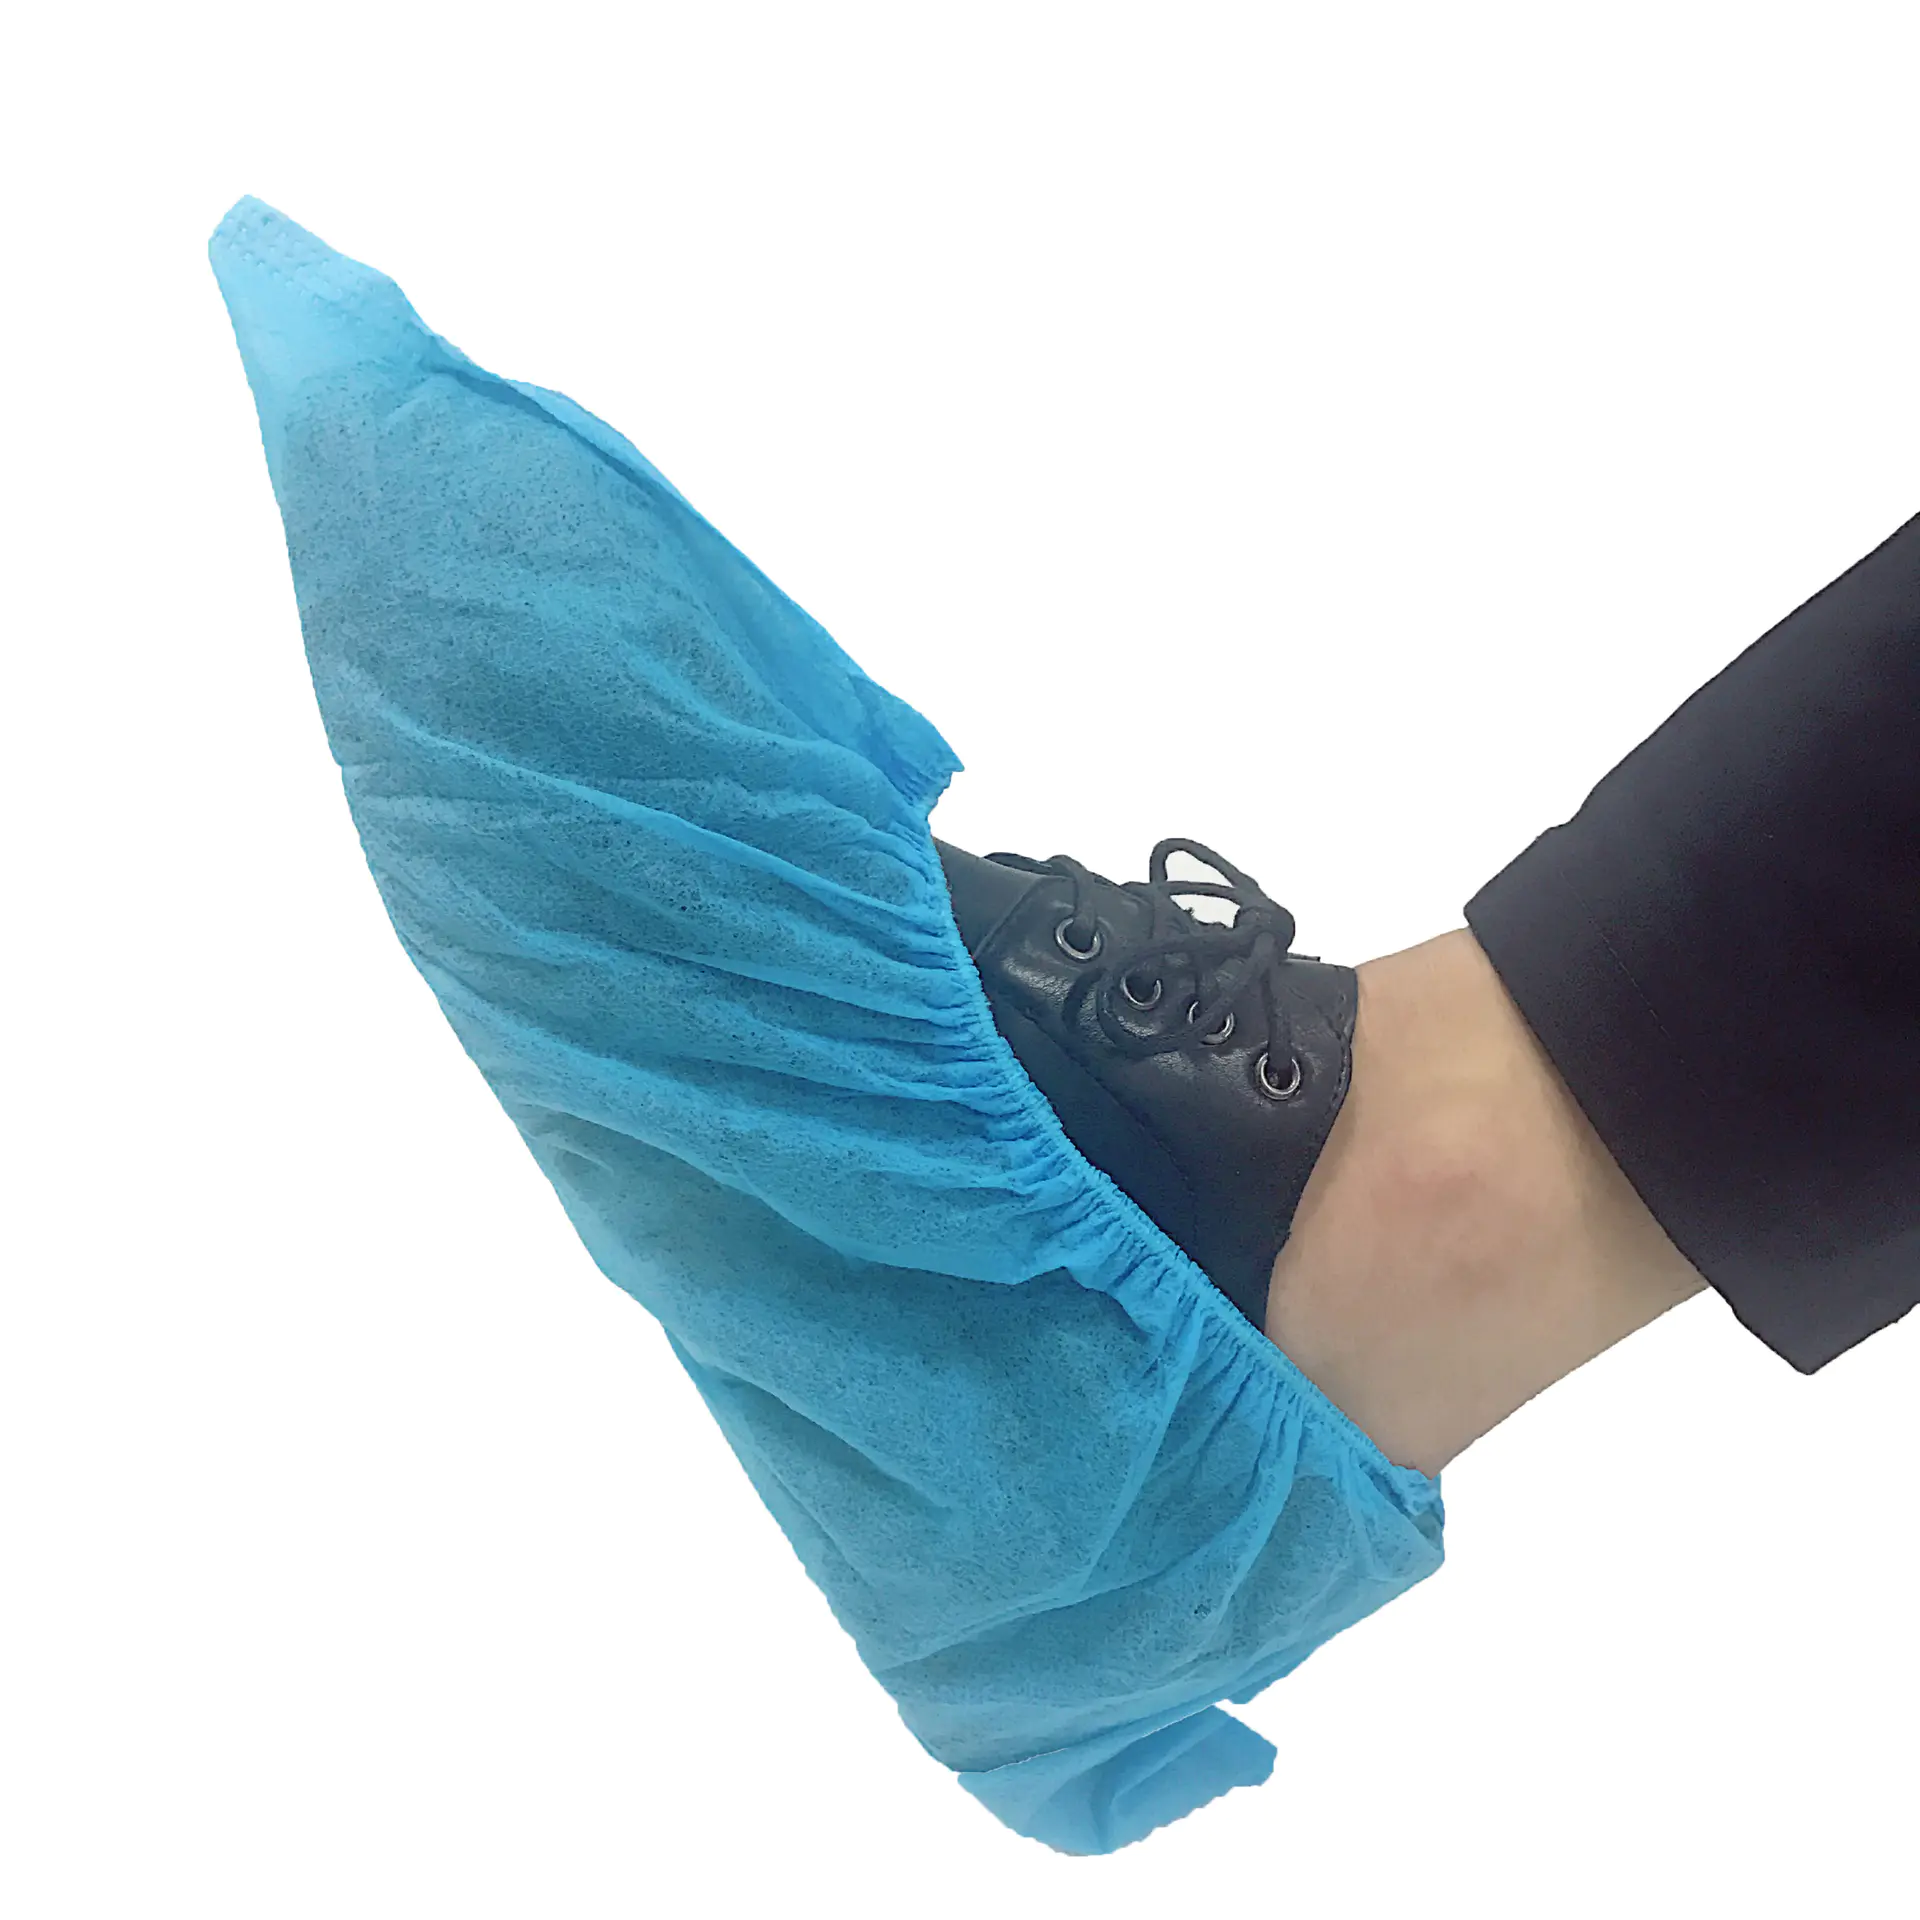 Disposable shoecover 100%pp nonwoven fabric